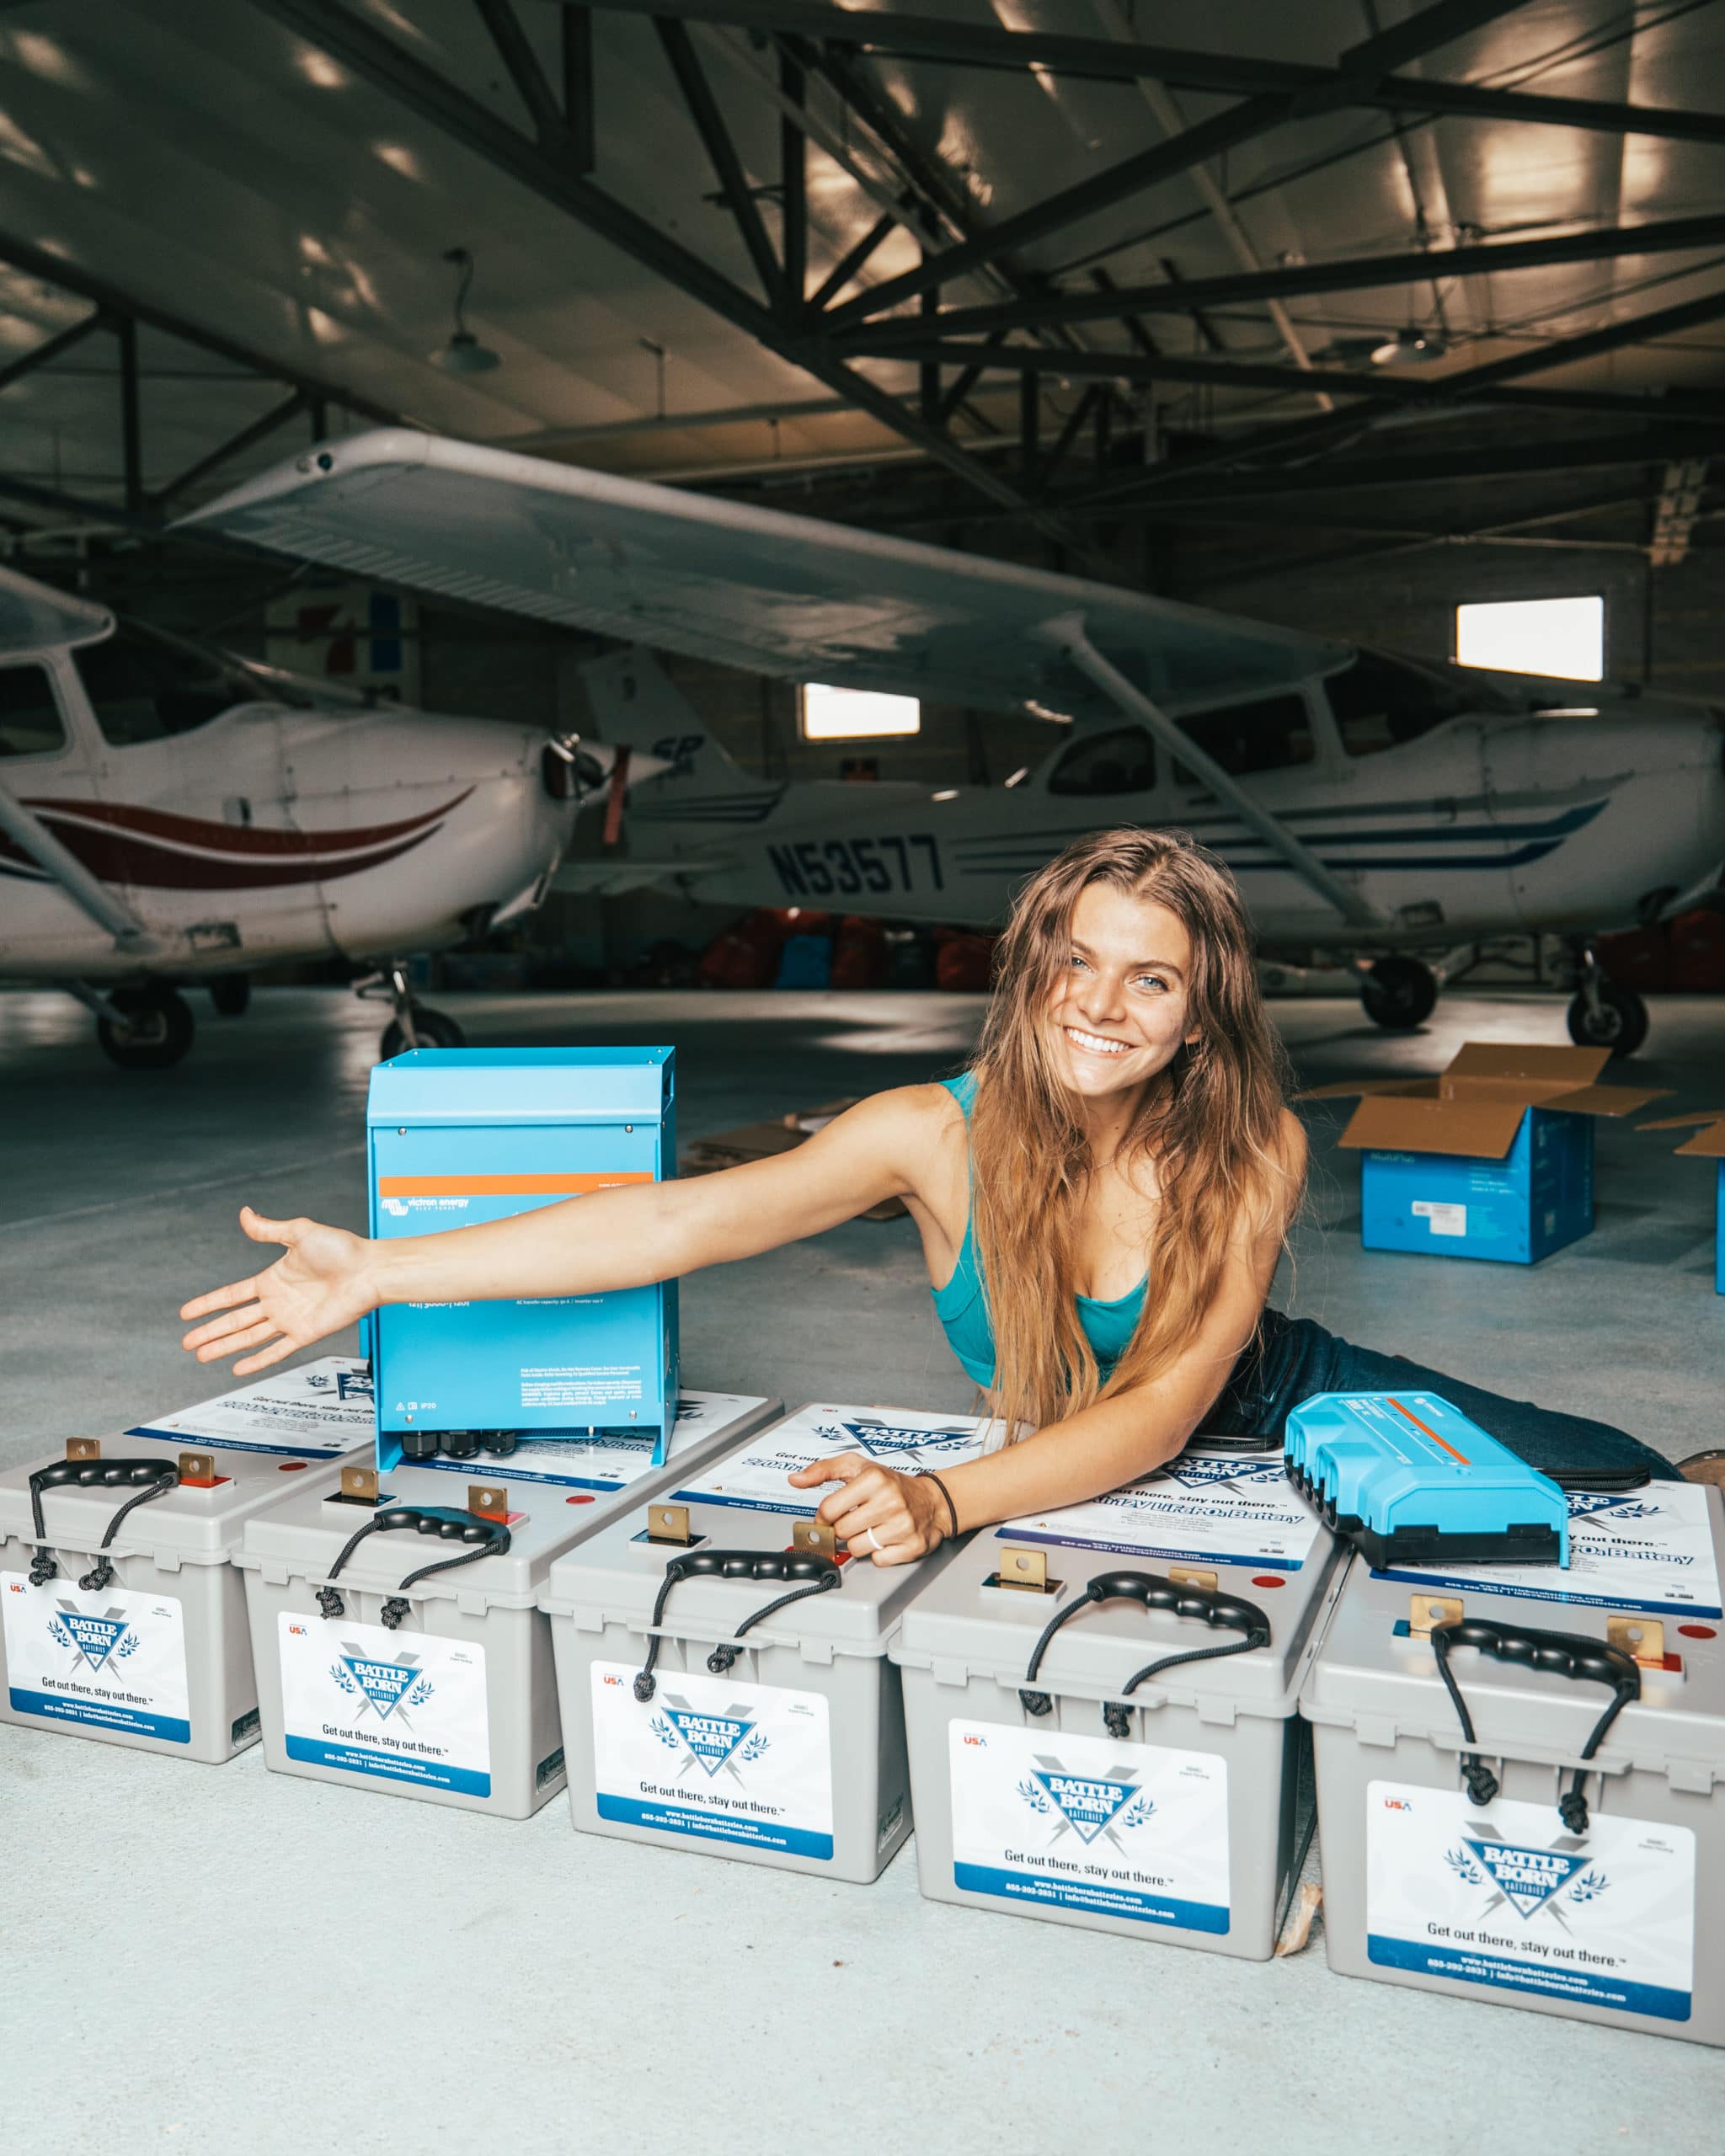 Jade with the Battle Born Batteries for the Expedition Evans Sailboat